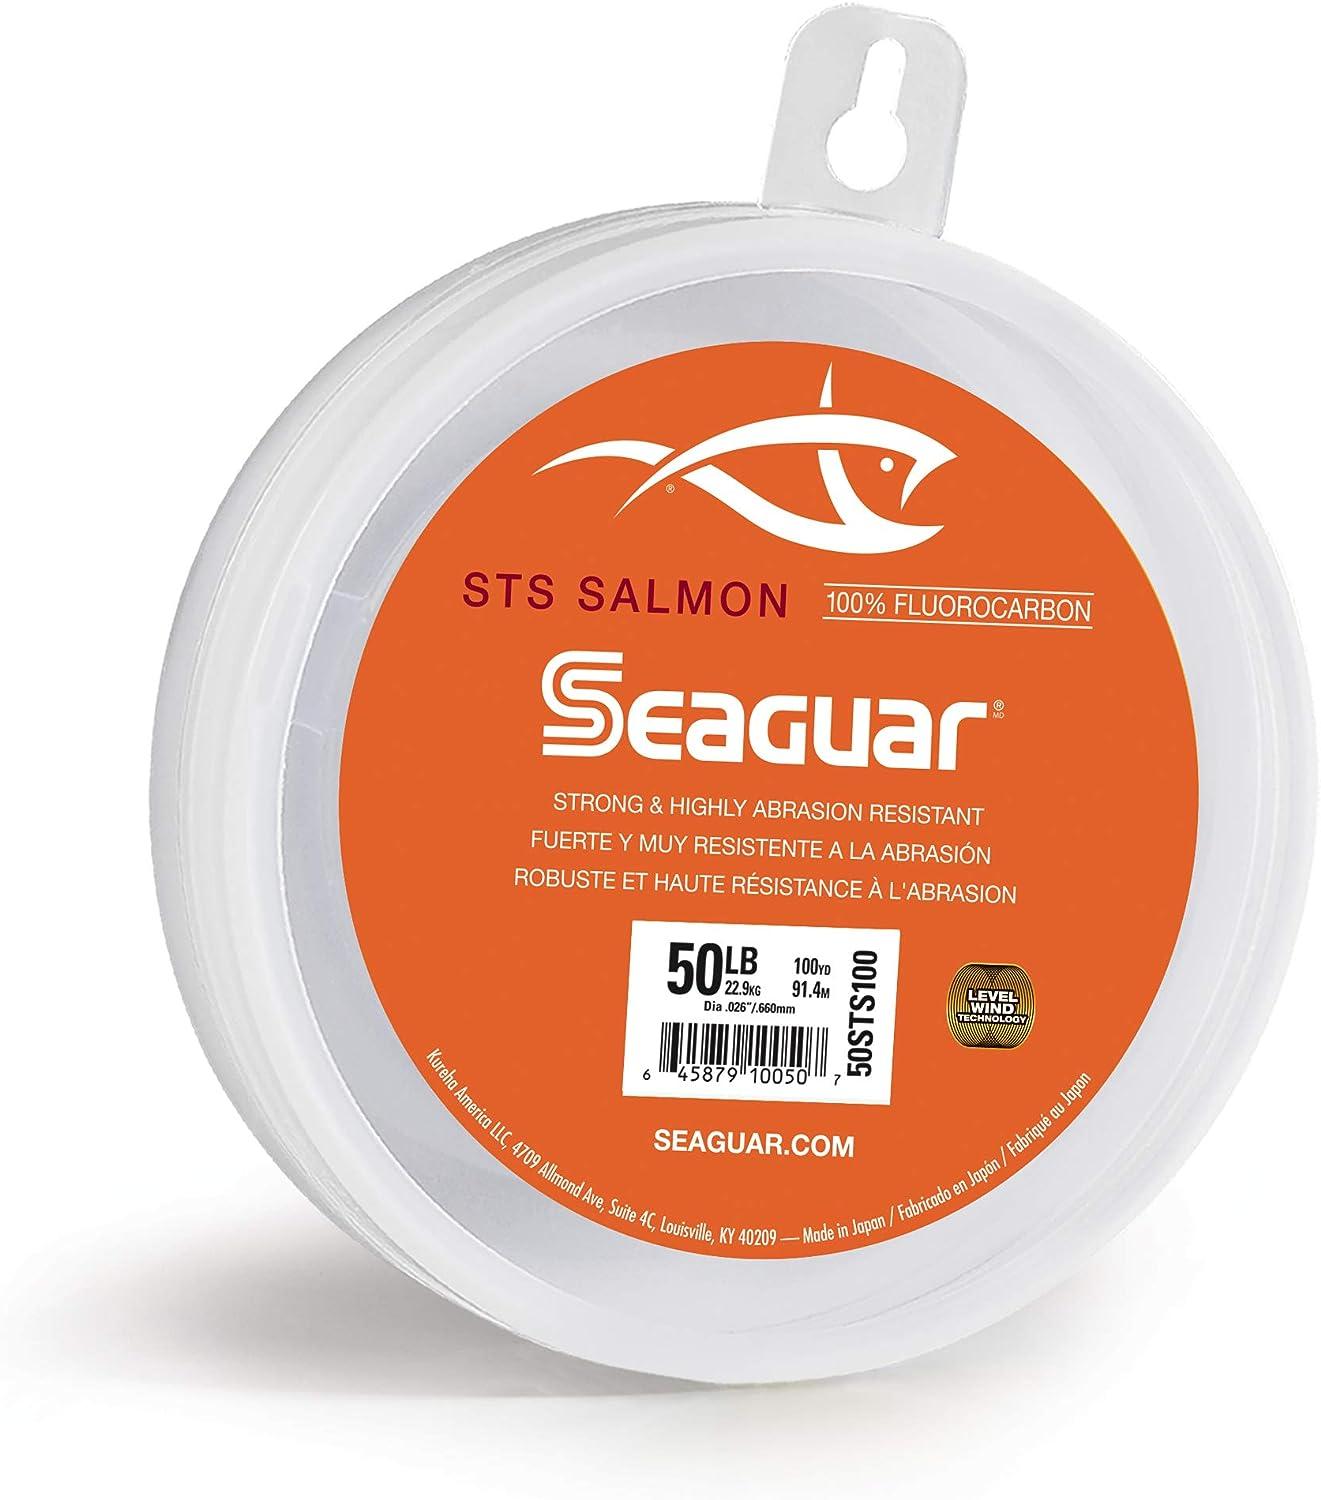 Seaguar STS Salmon Fishing Line, Strong and Abrasion Resistant